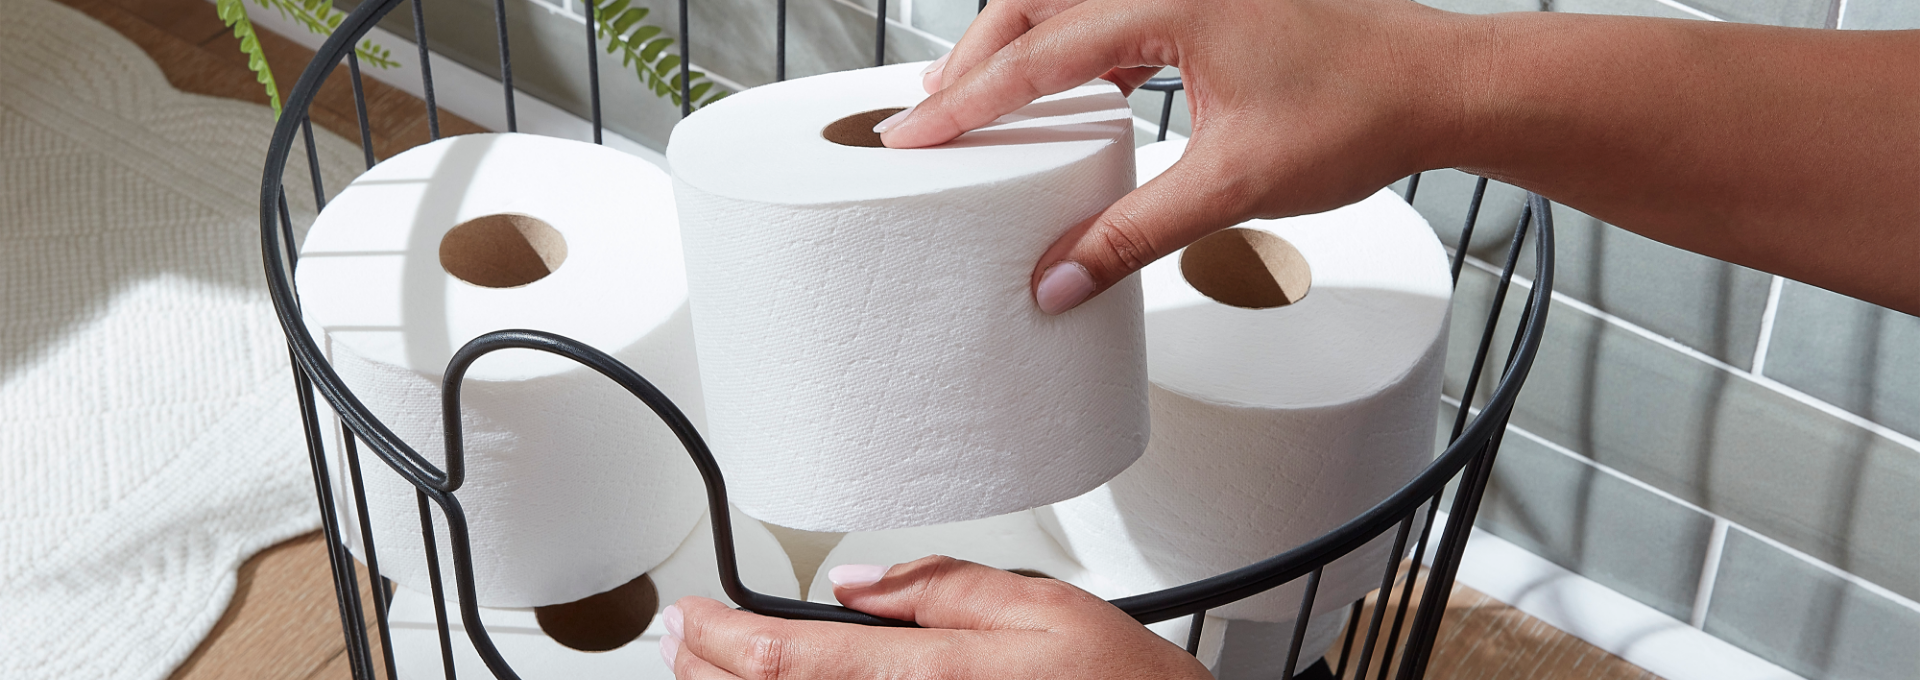 A person placing a Quilted Northern toilet tissue roll into a basket.